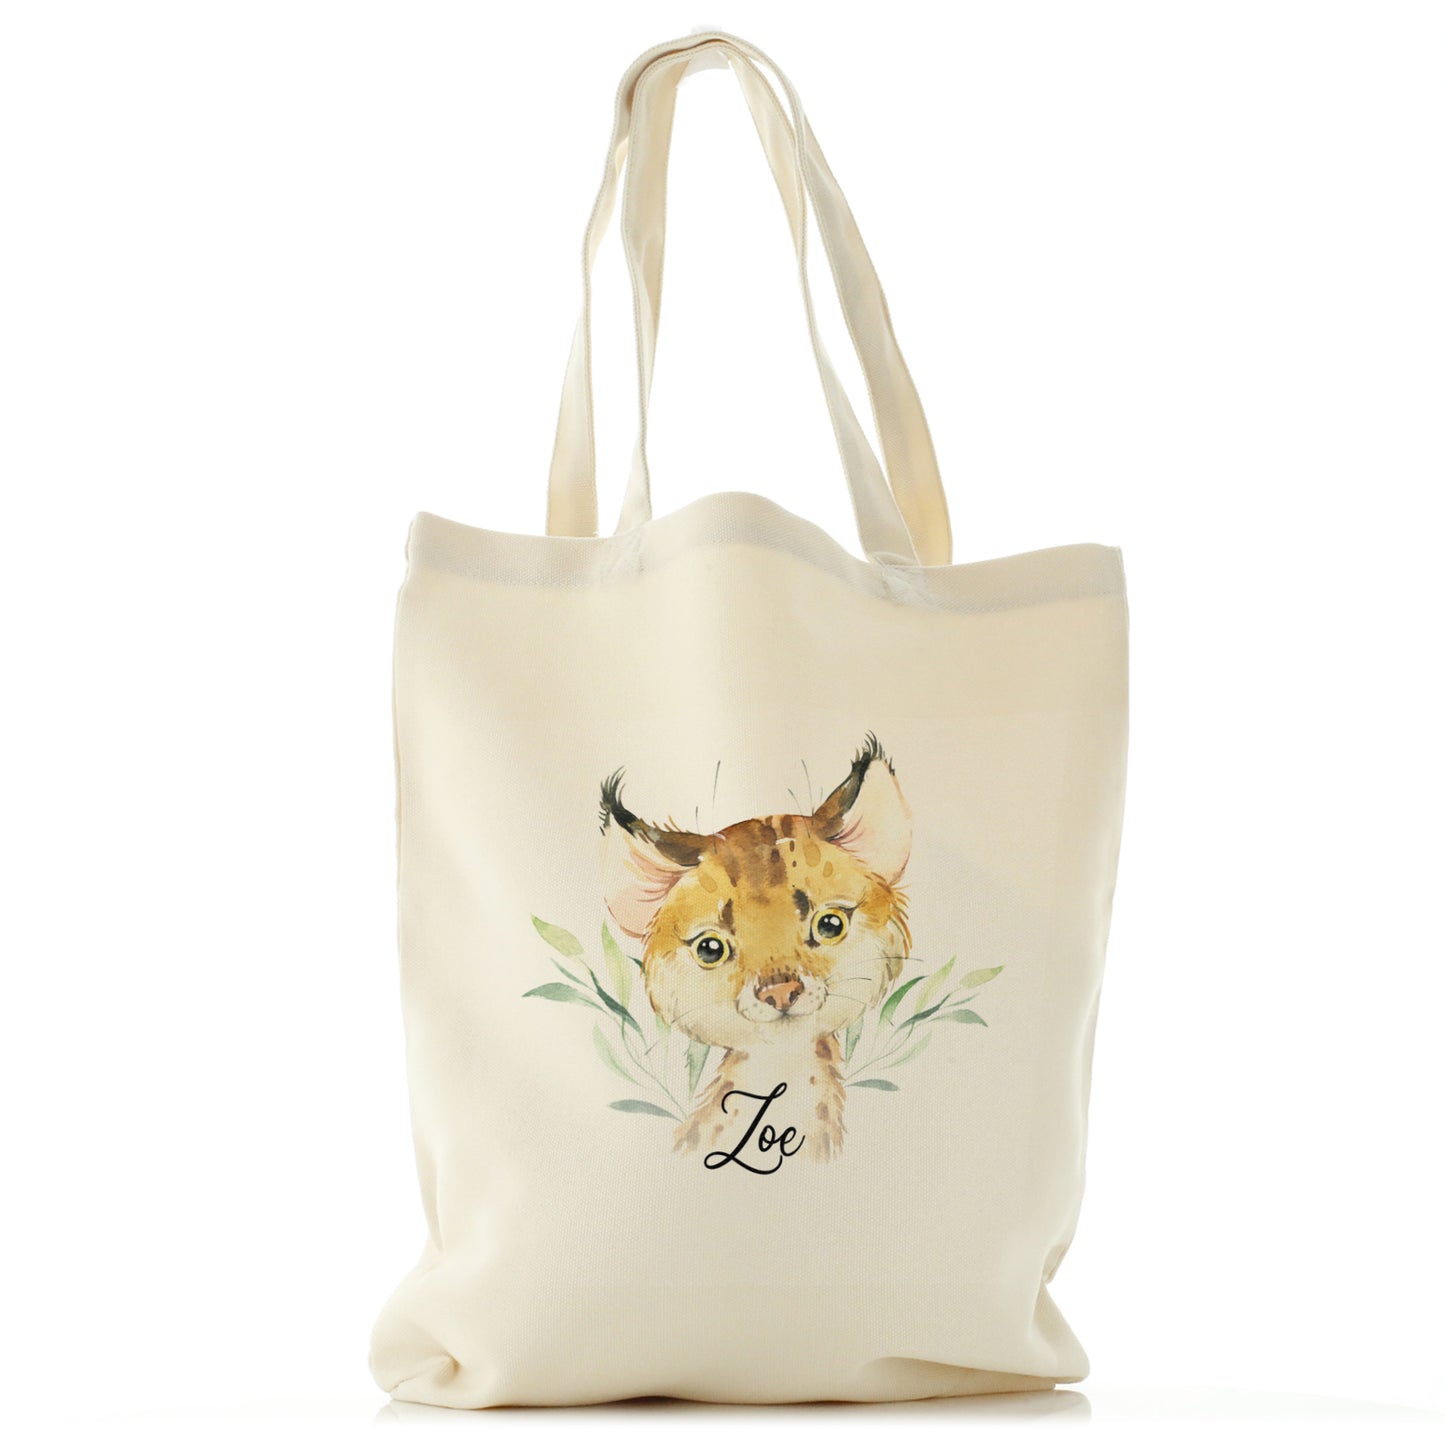 Personalised Canvas Tote Bag with Spot Cat and Leaves and Cute Text